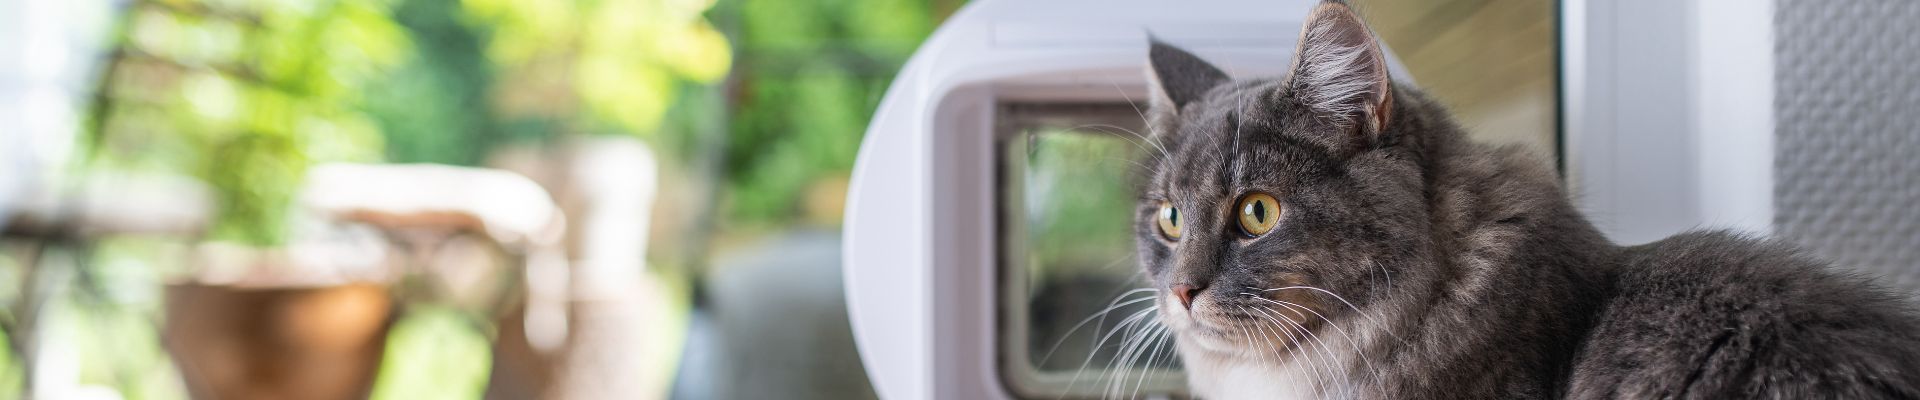 gray fluffy cat by window banner